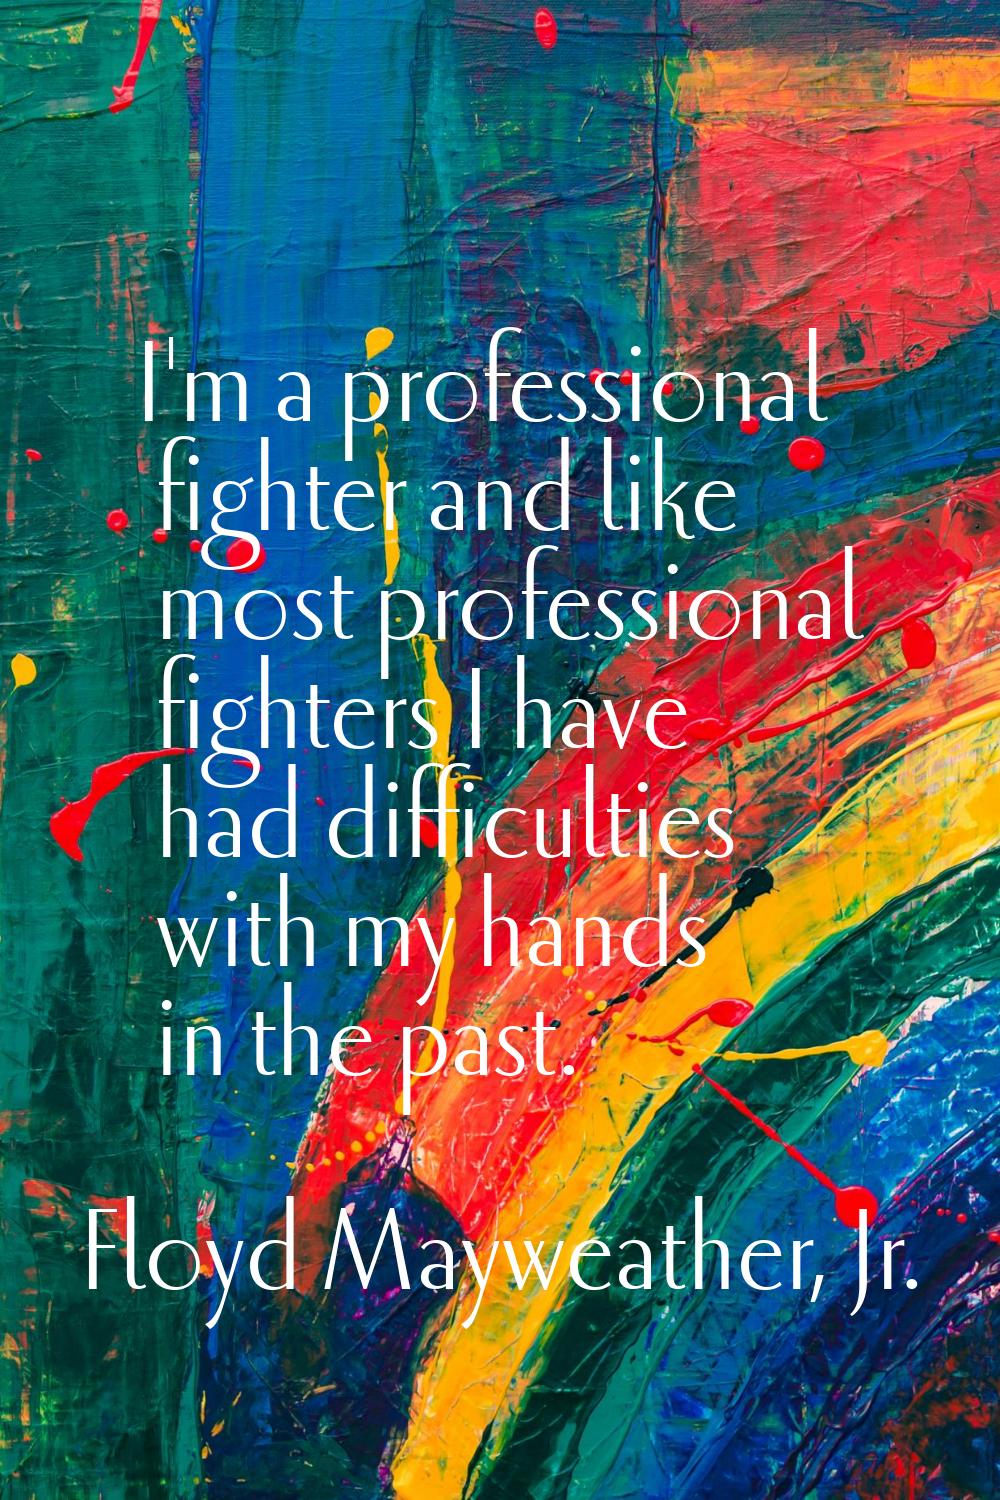 I'm a professional fighter and like most professional fighters I have had difficulties with my hand